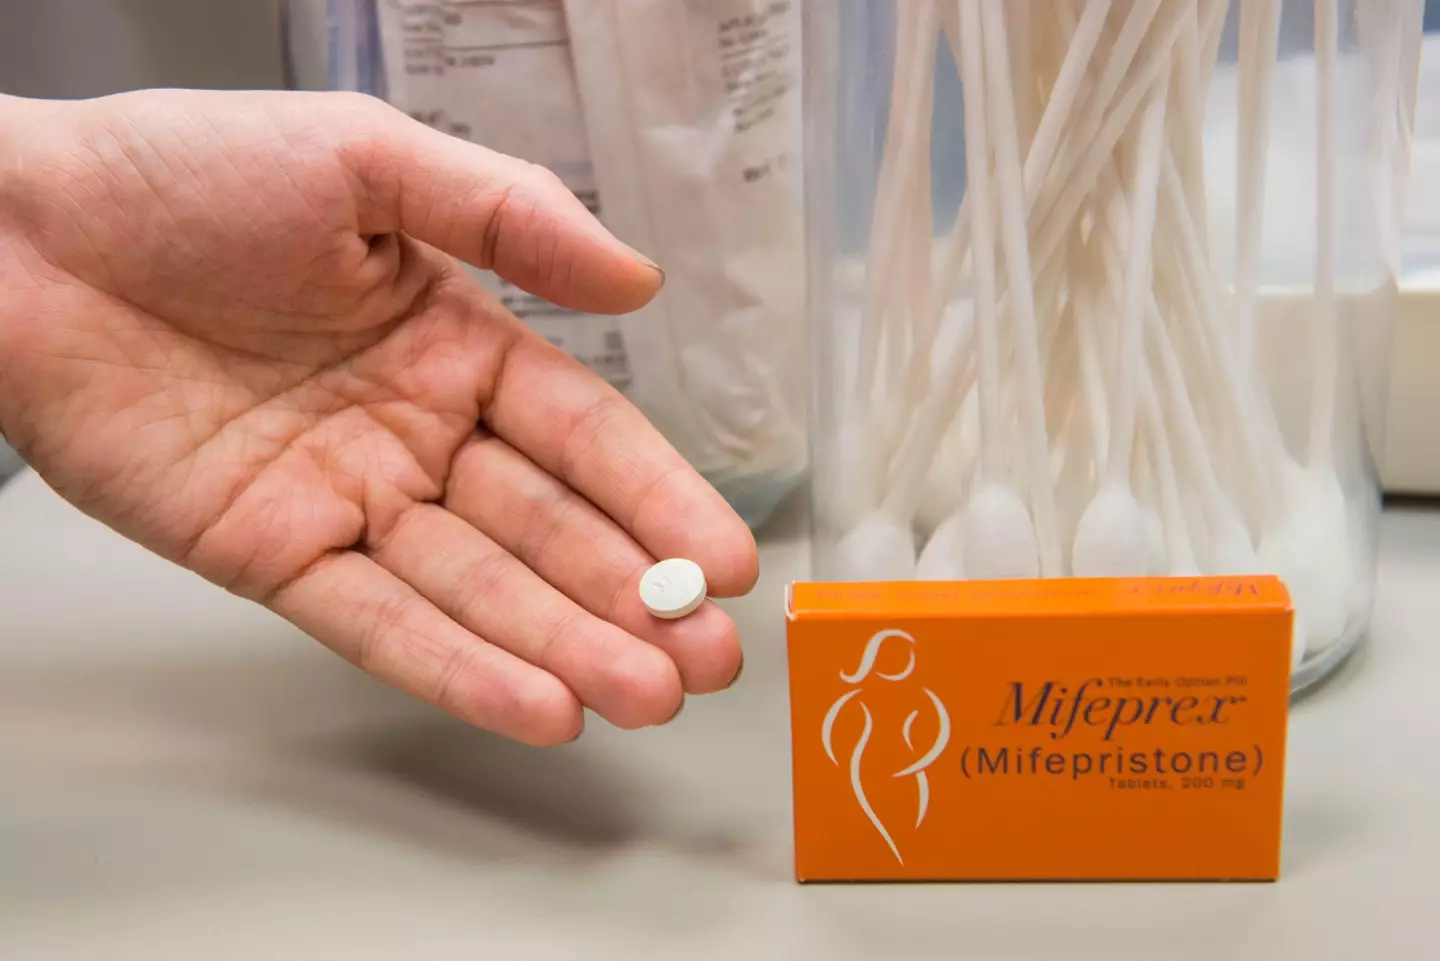 The Supreme Court protected women's access to mifepristone.